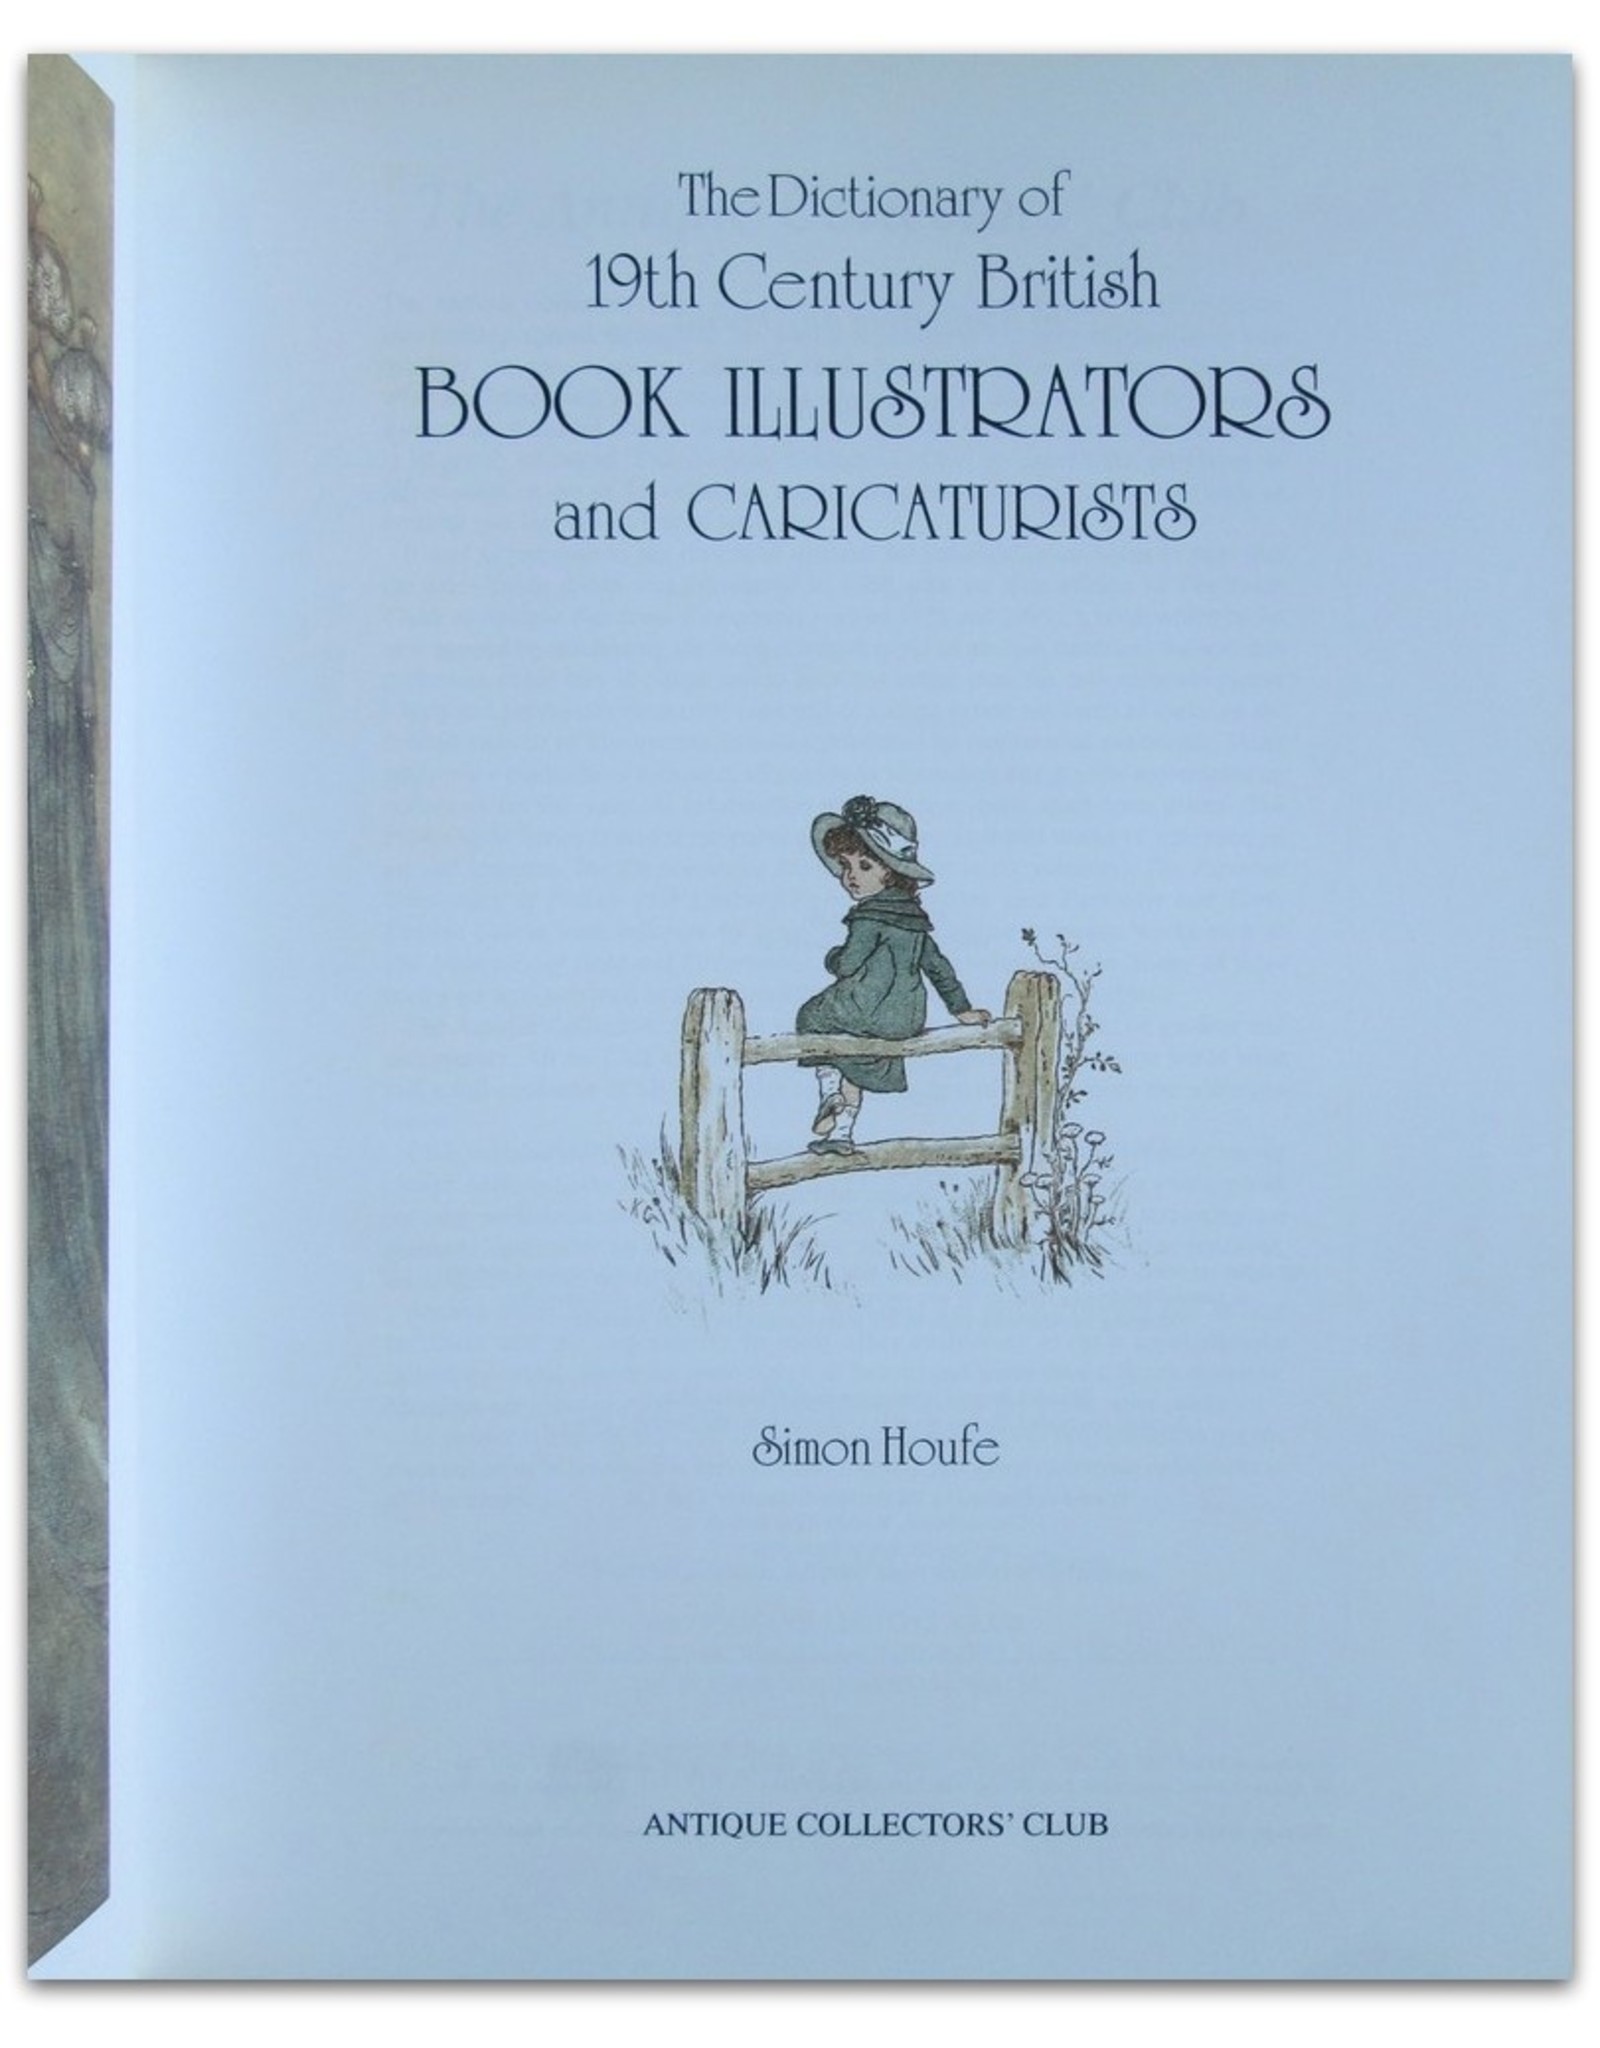 Simon Houfe - The Dictionary of 19th Century British Book Illustrators and Caricaturists